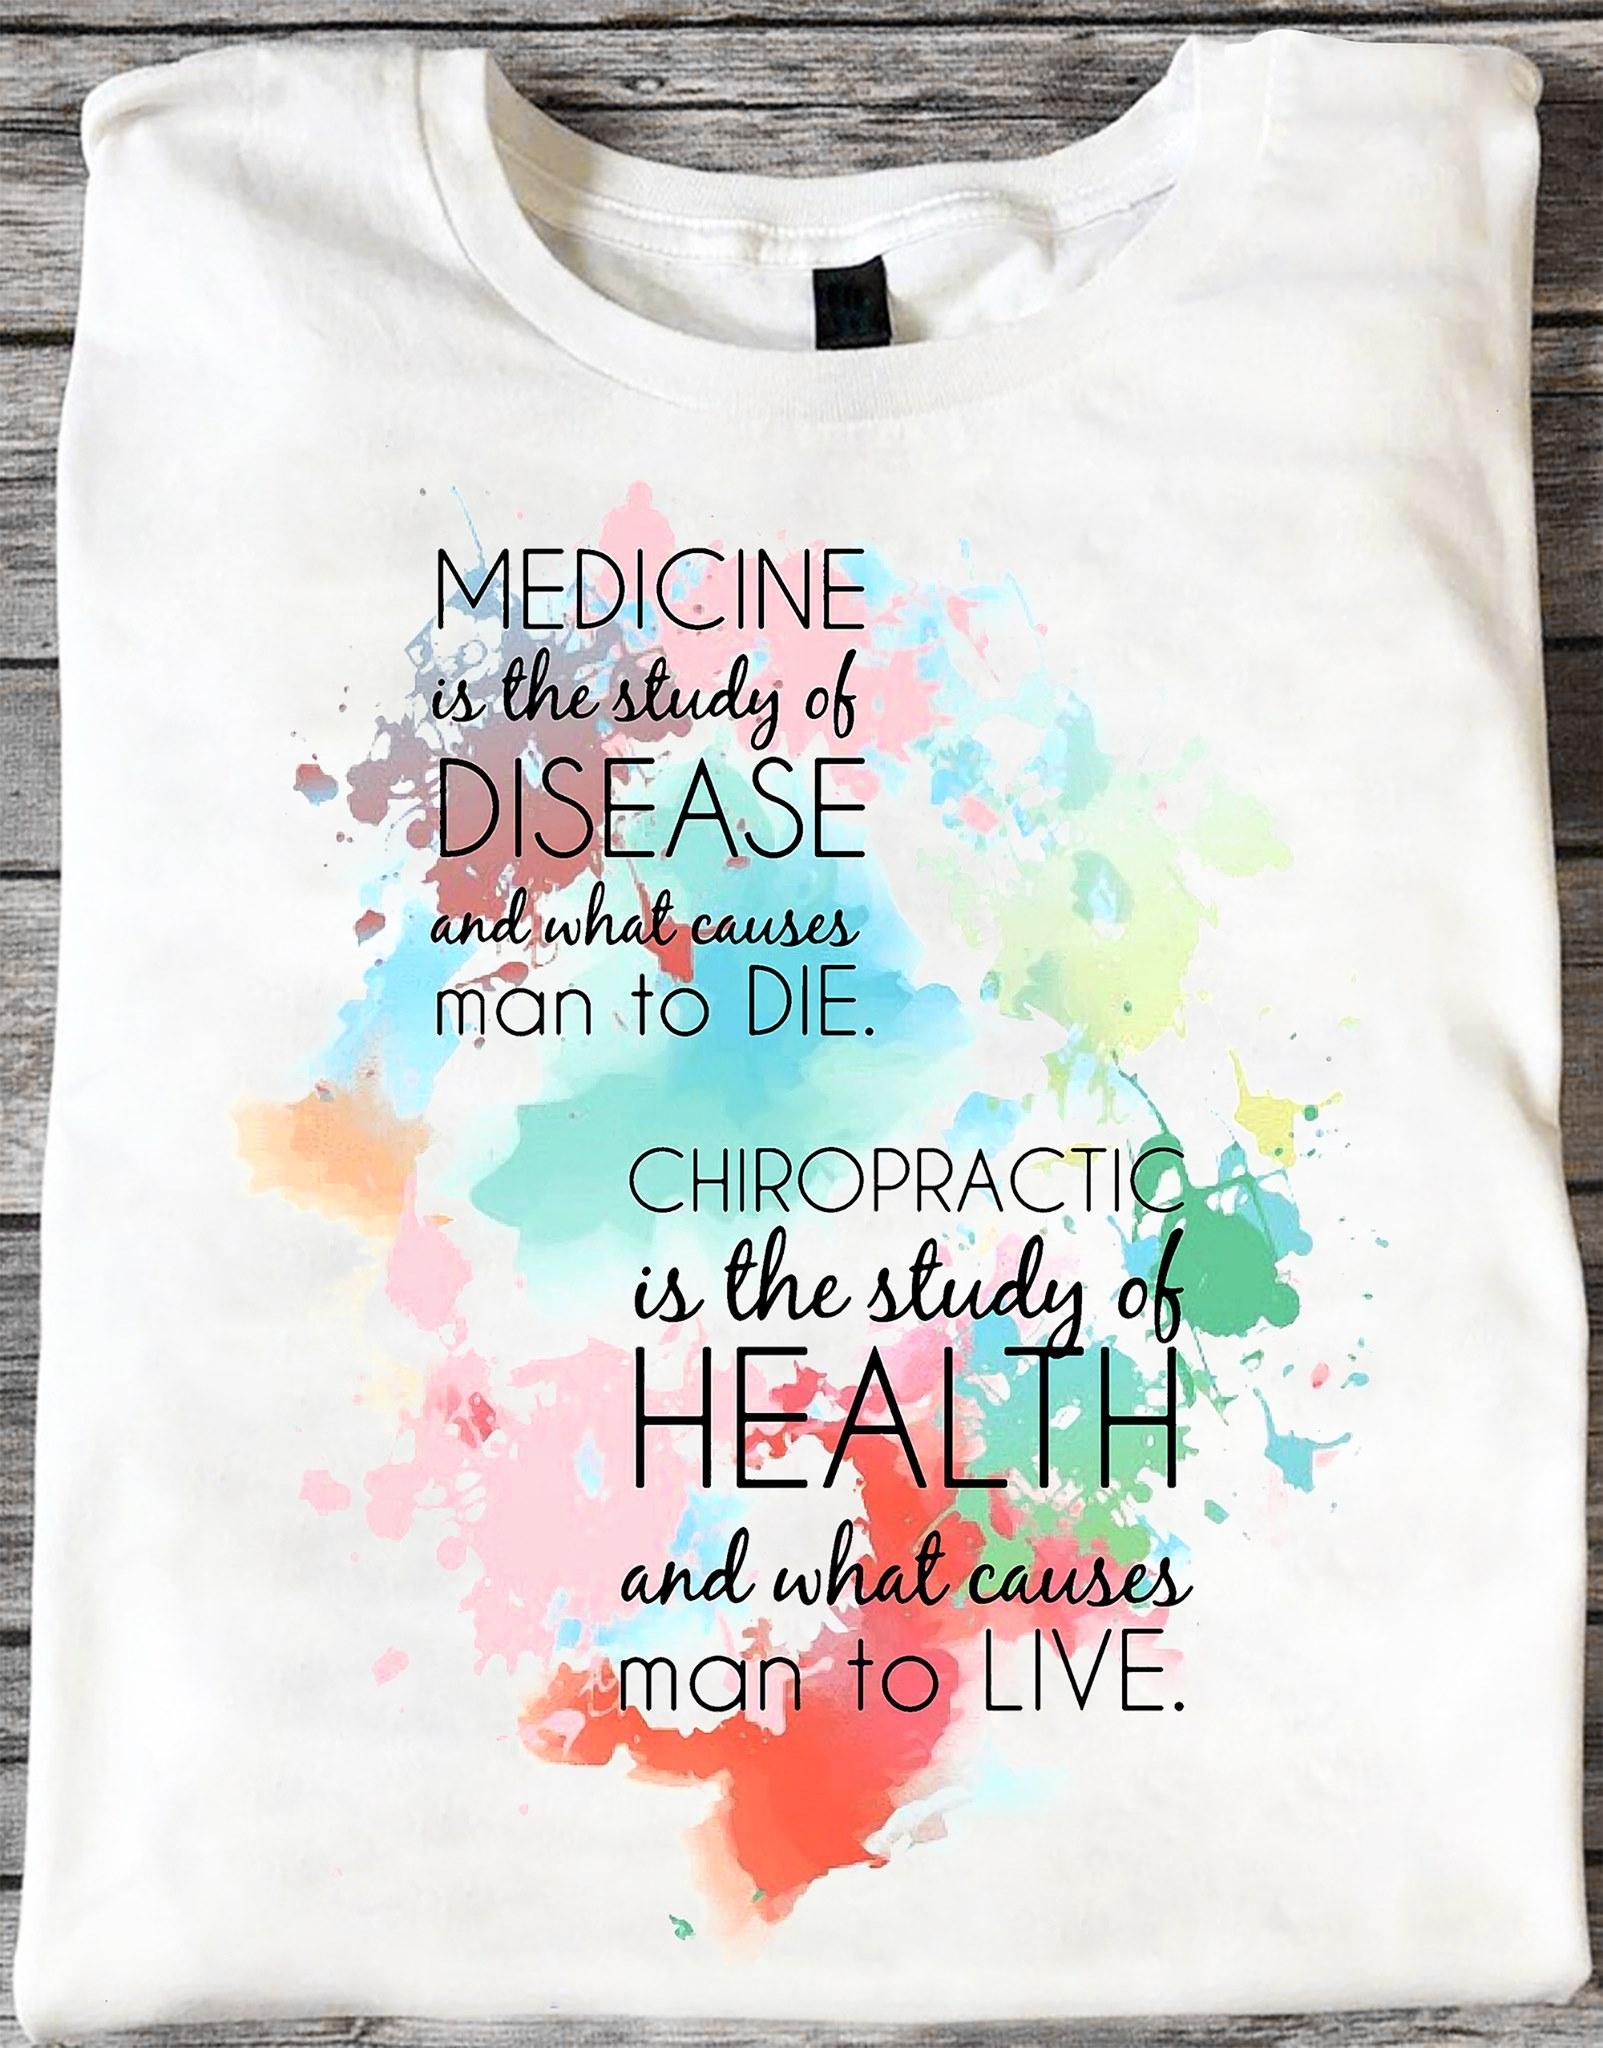 Medicine is the study of disease and what causes man to die chiropractic is the study of healthy and what causes man to live